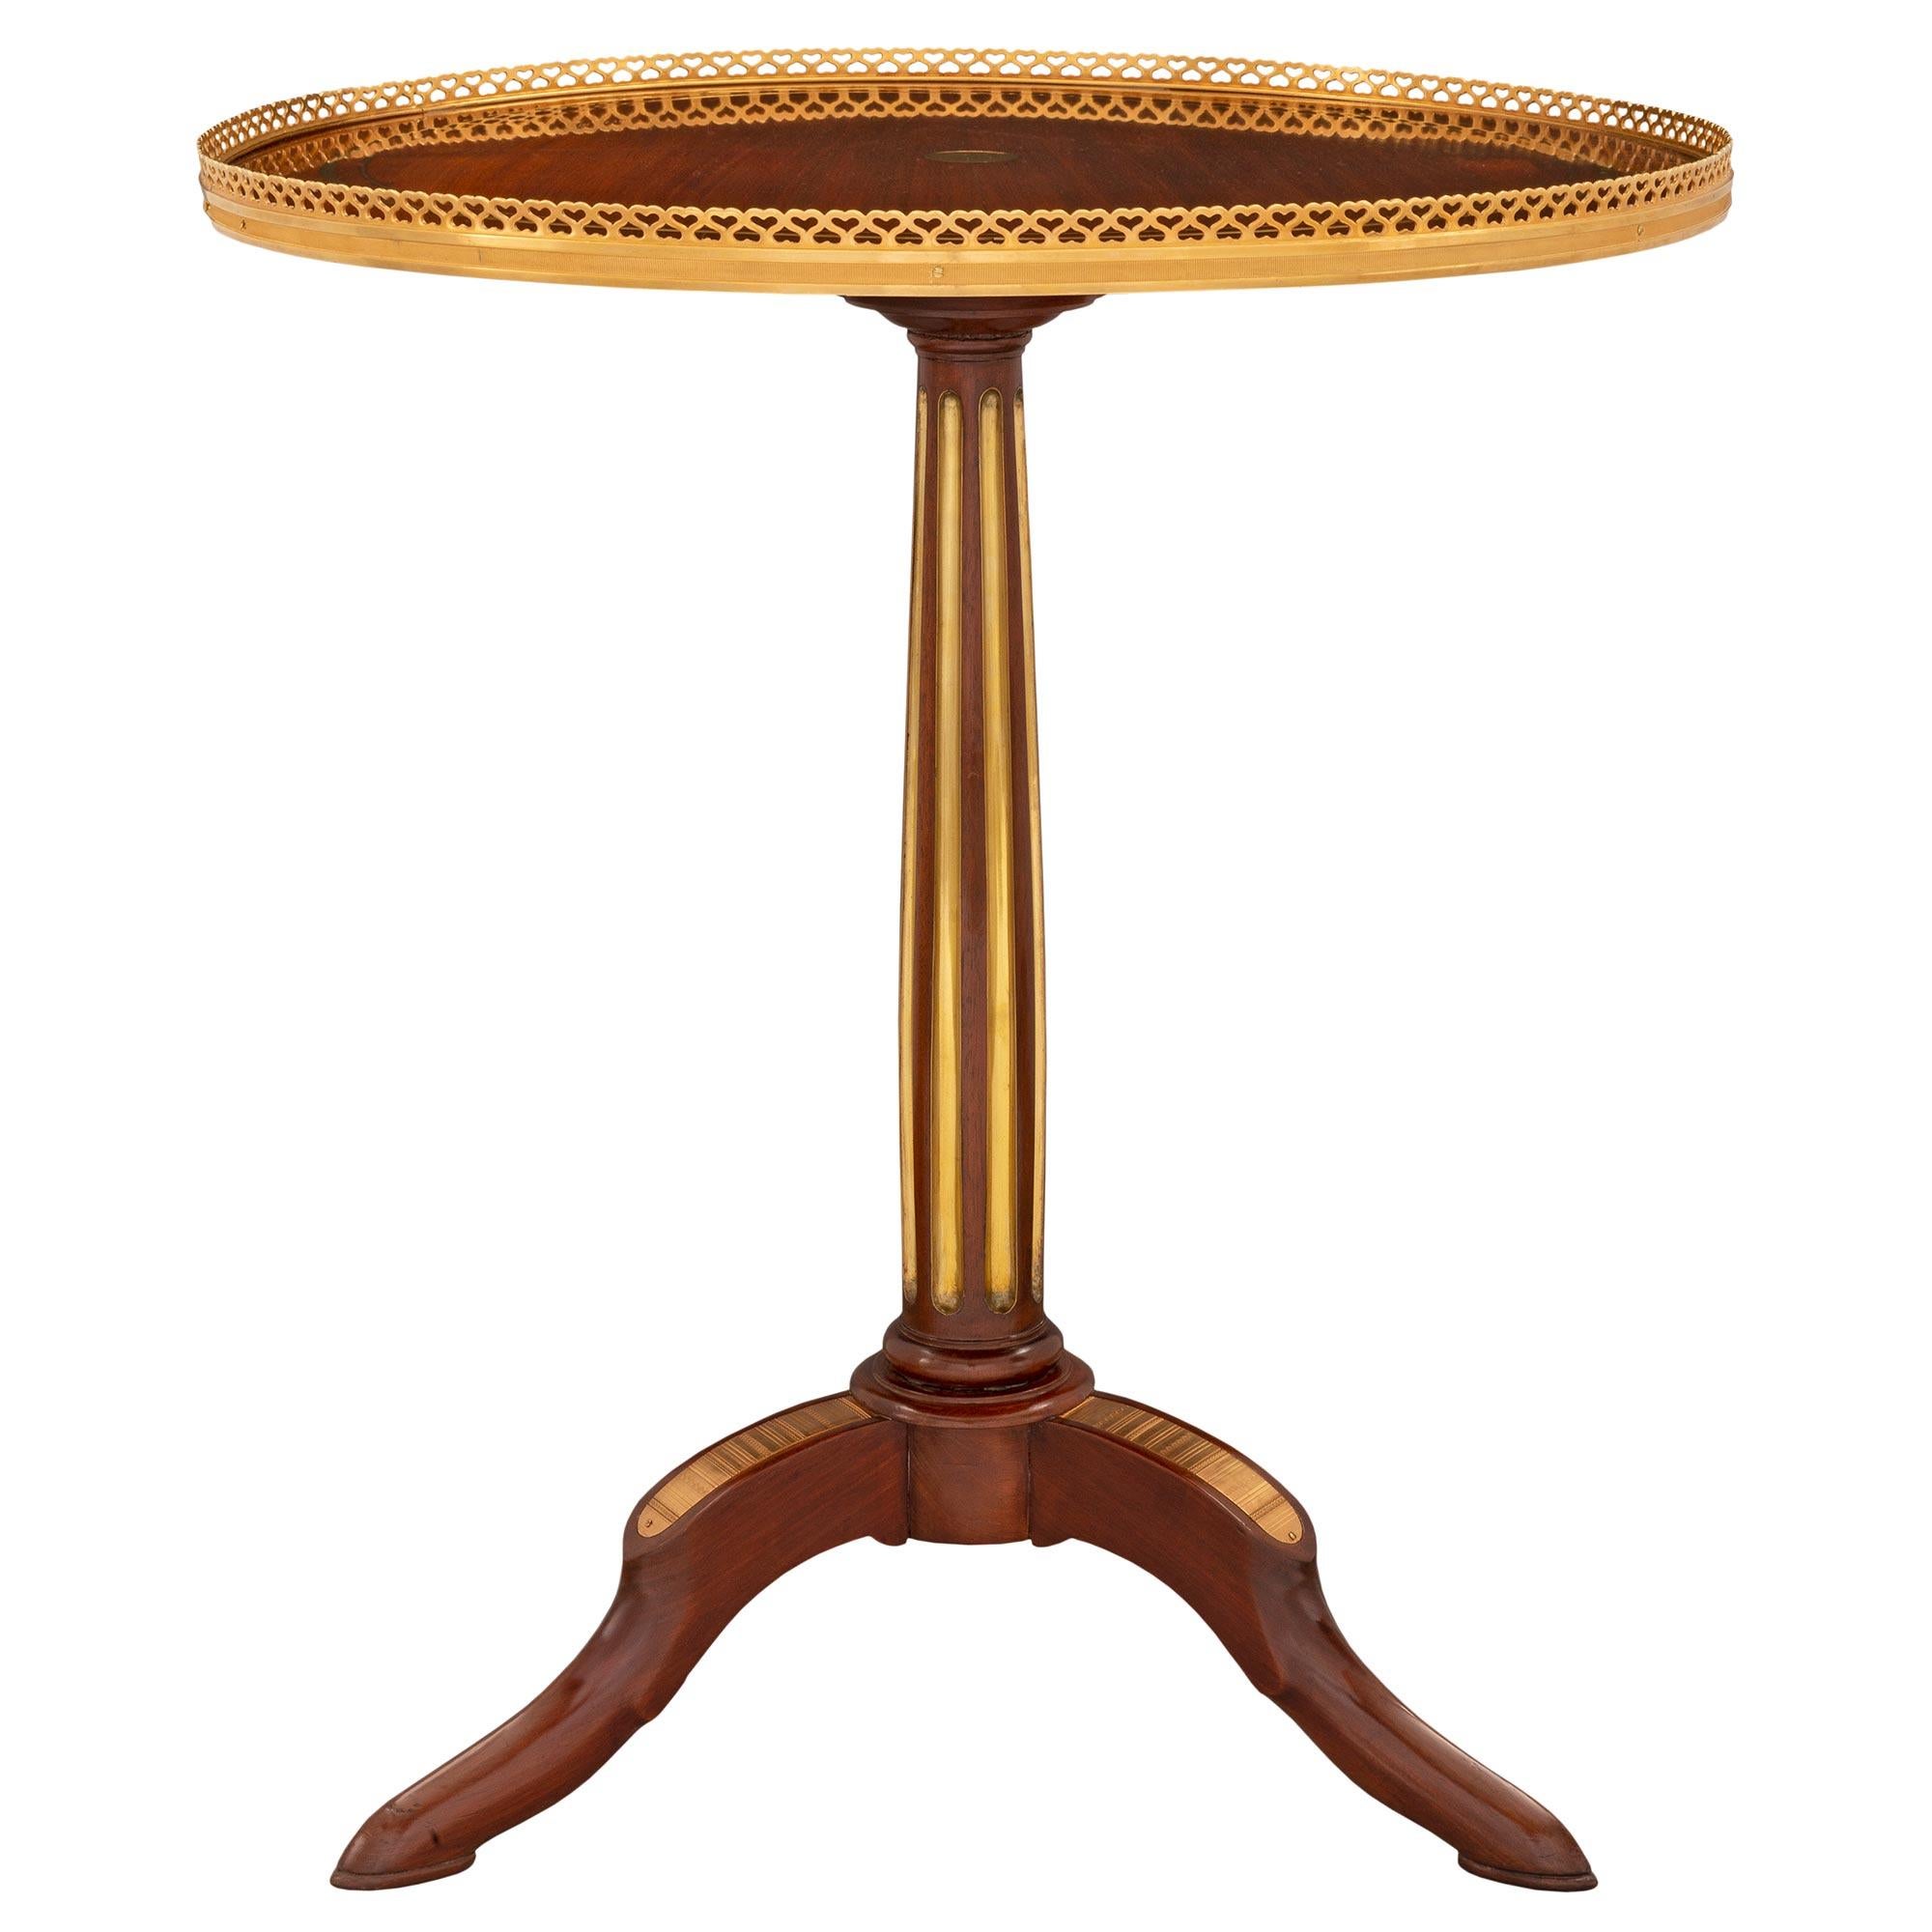 French 18th Century Directoire Period Mahogany, Ormolu and Brass Side Table In Good Condition For Sale In West Palm Beach, FL